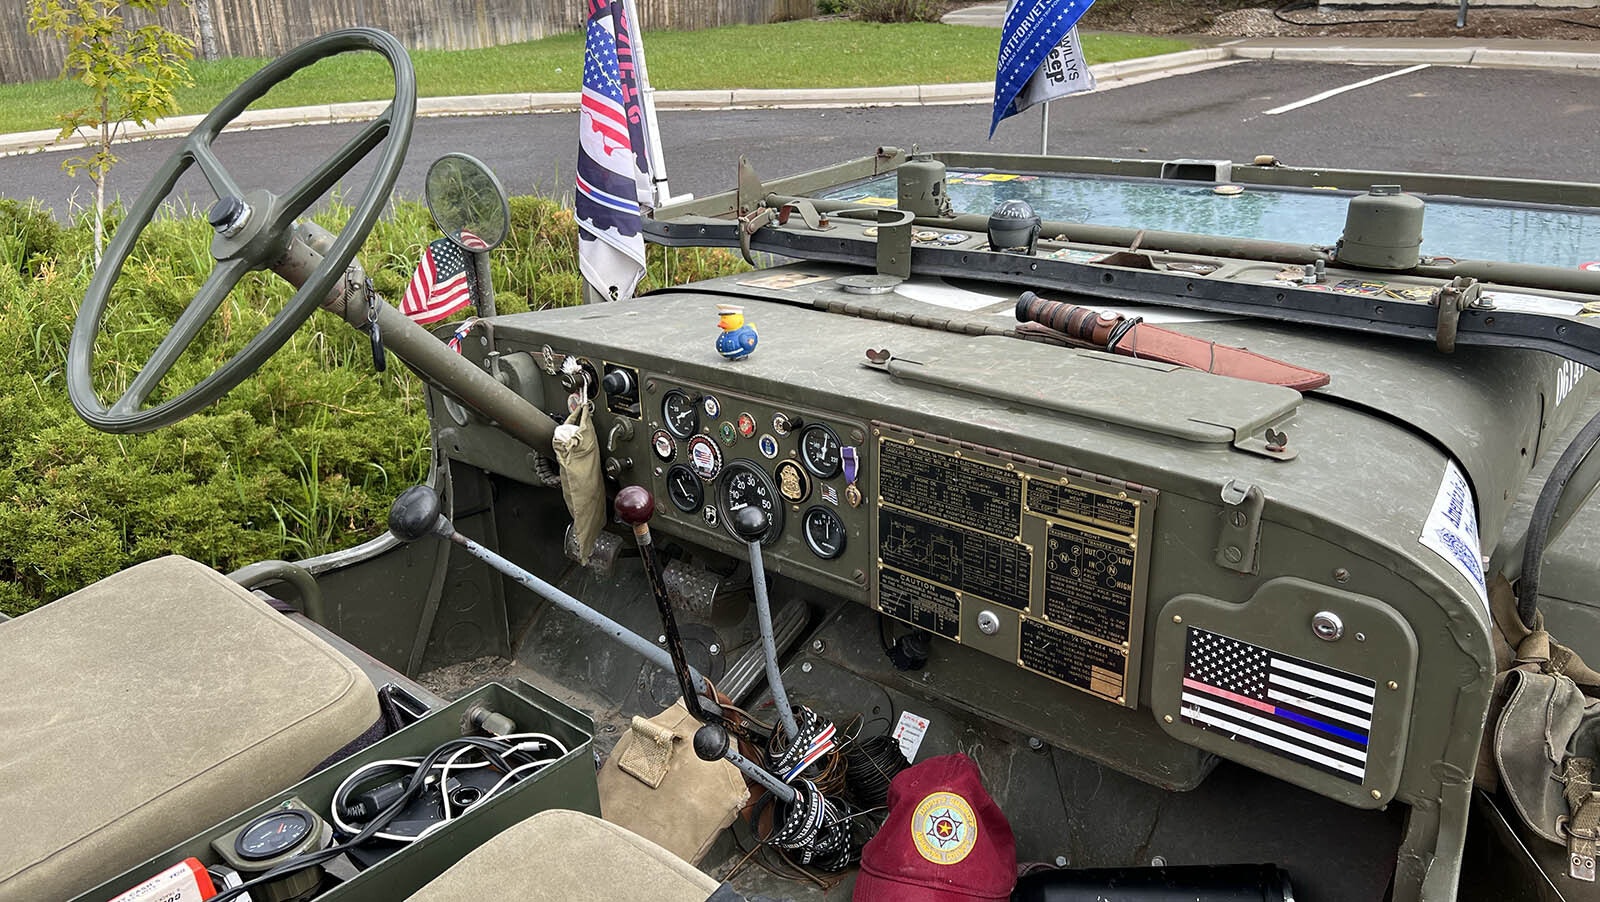 The cockpit of Little Glory, a 1952 Willys Jeep.